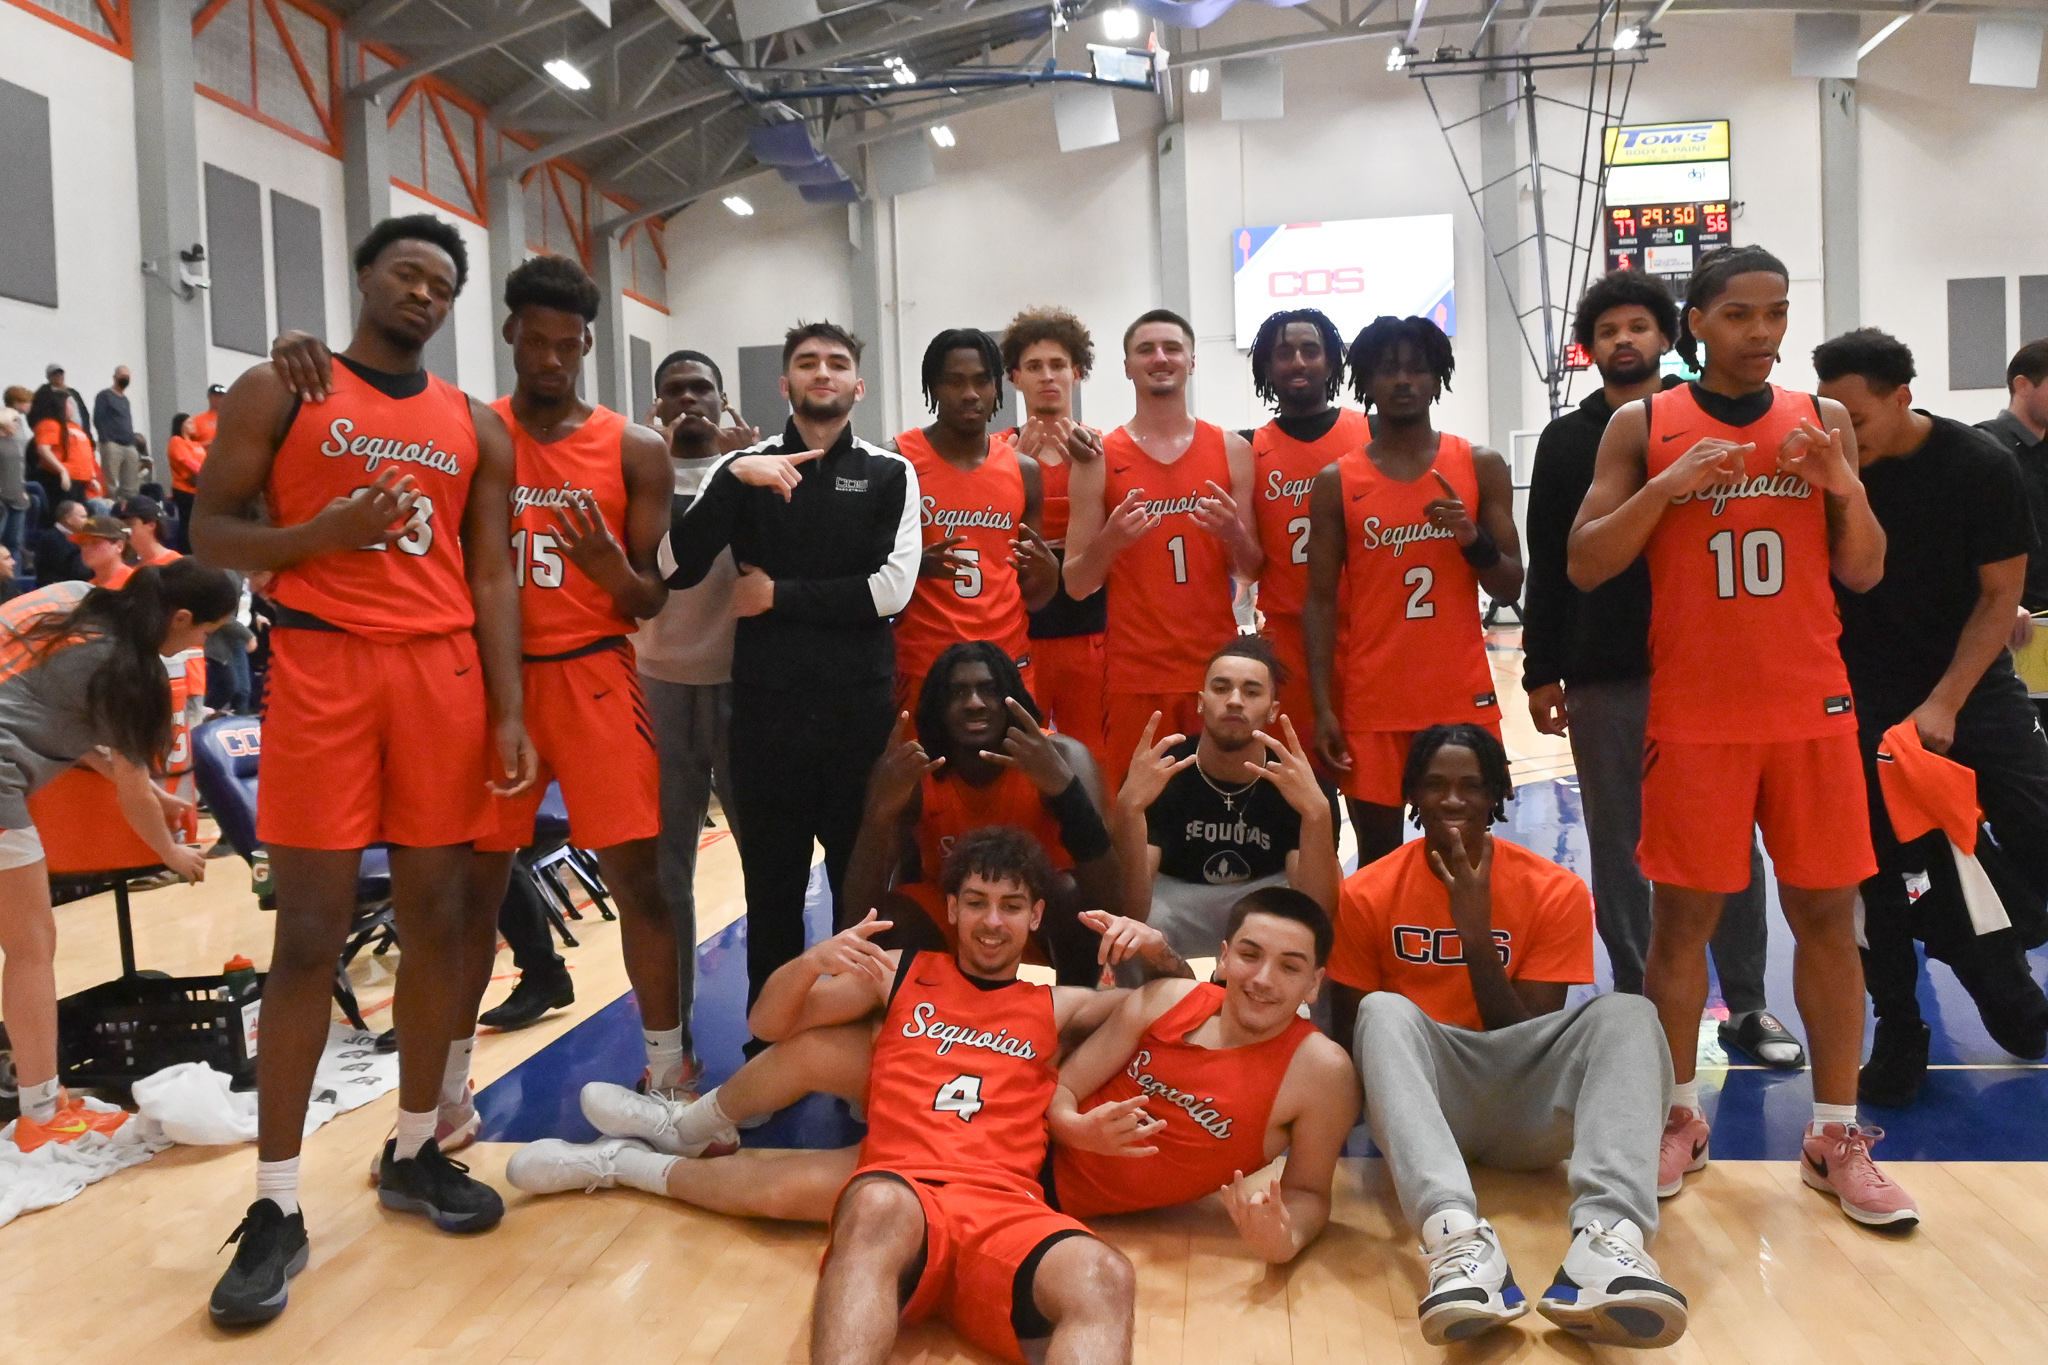 Giants take control early, cruise past Santa Rosa into NorCal Regional men's basketball finals